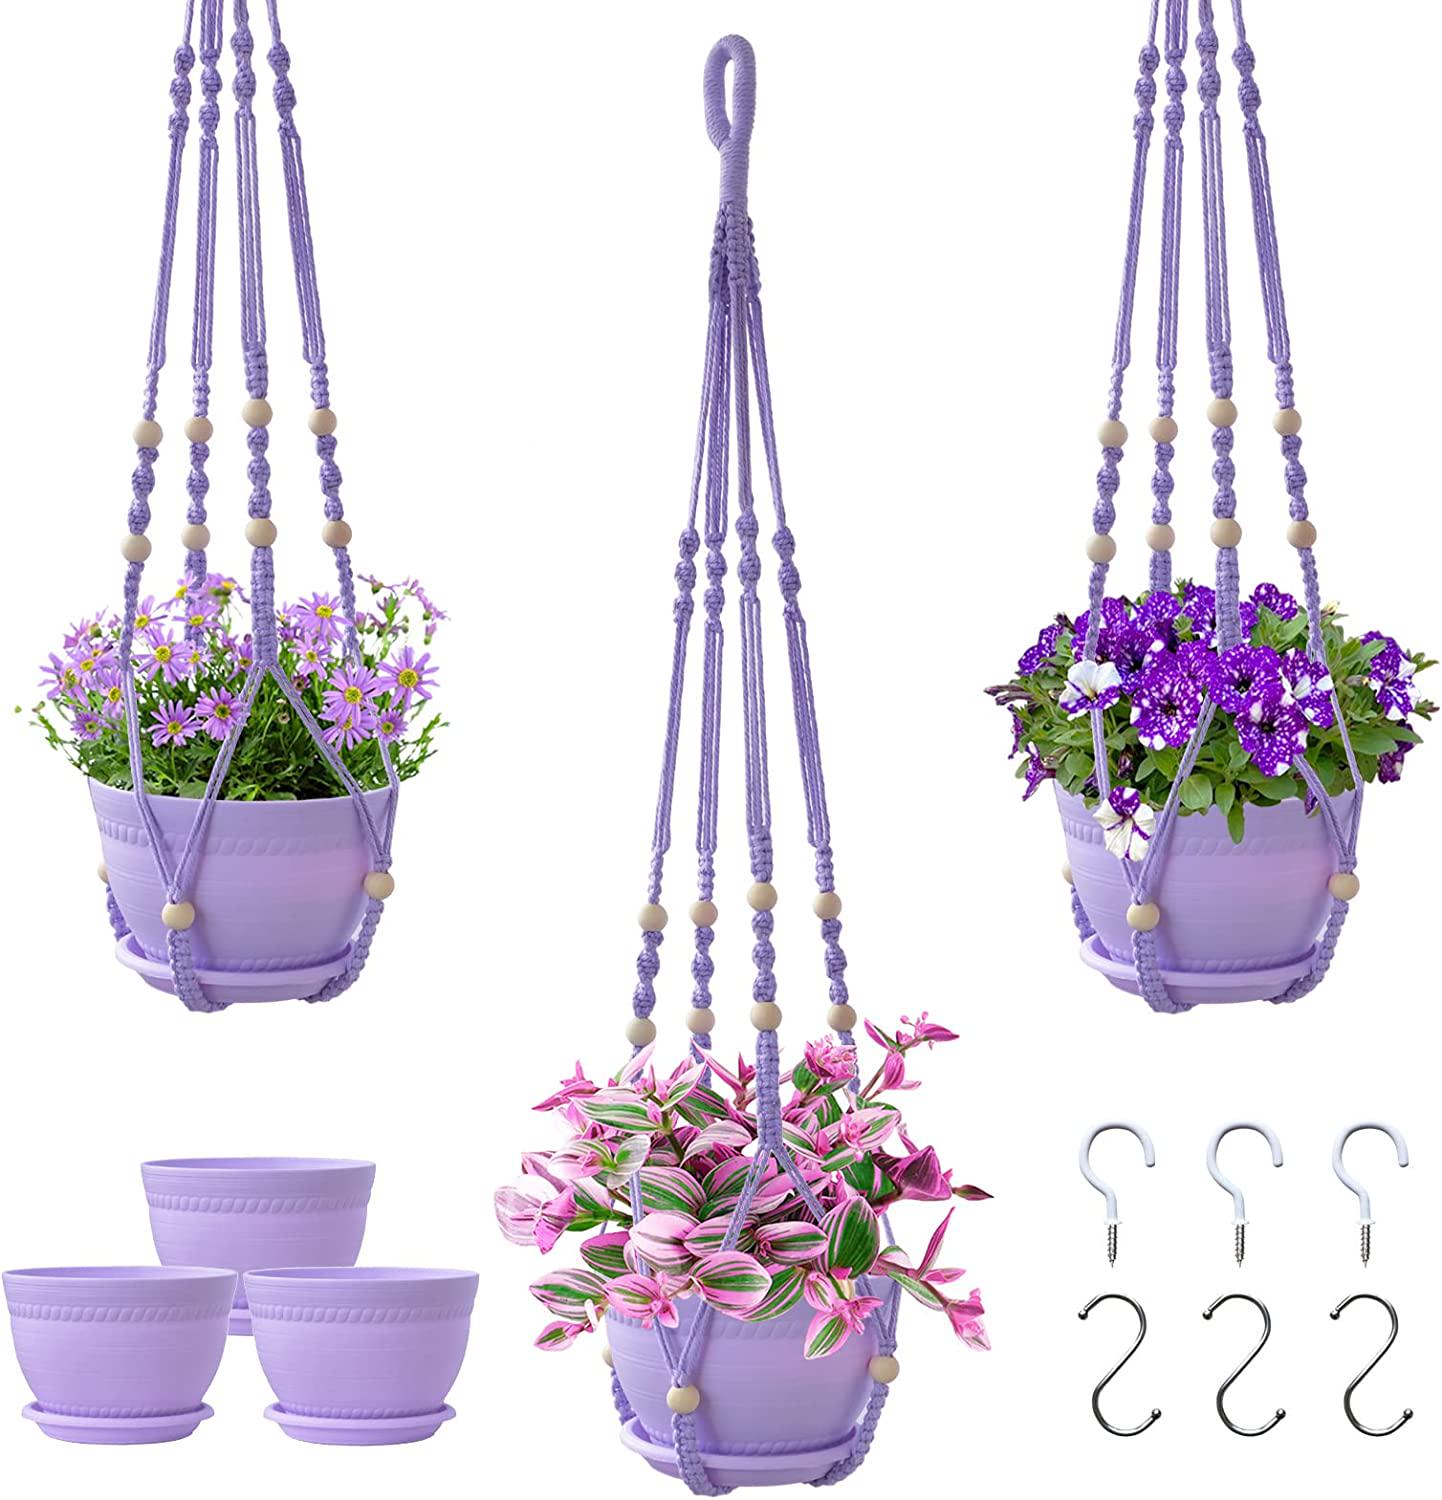 Checrxy Macrame Plant Hanger with Pot, 3 Set Hanging Planters for Indoor Plants, Handmade Cotton Rope Boho Home Decor, Idea Gift for Anyone, Includes Plant Holders, Pots, Plates and Hooks (Purple)-